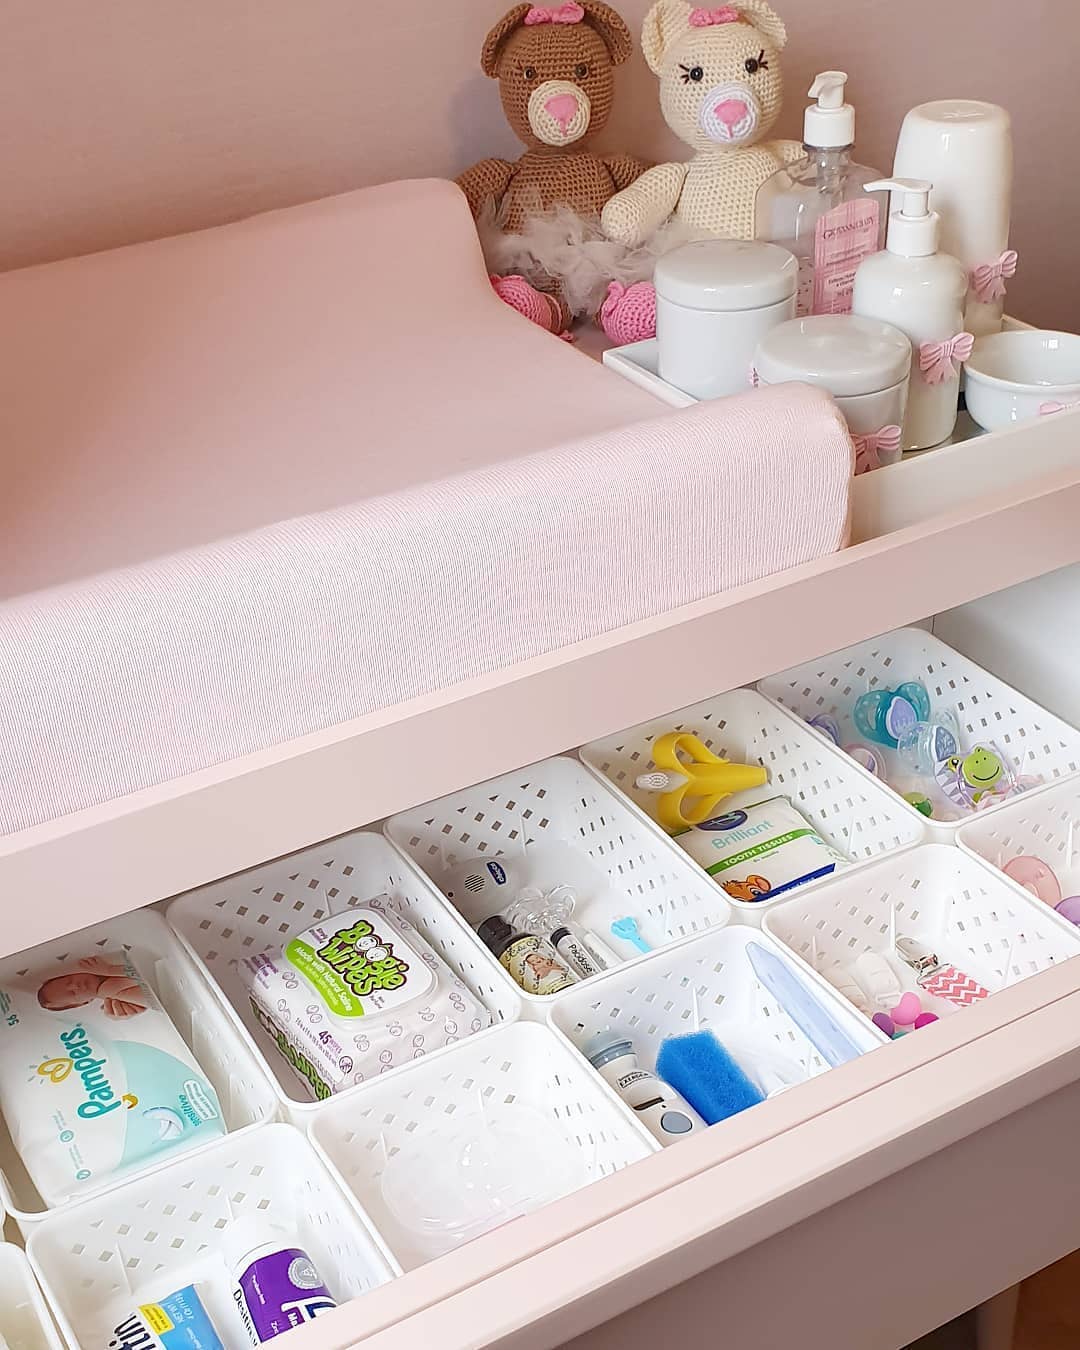 pink dresser with white plastic baskets holding small items photo by Instagram user @equilibriumservices